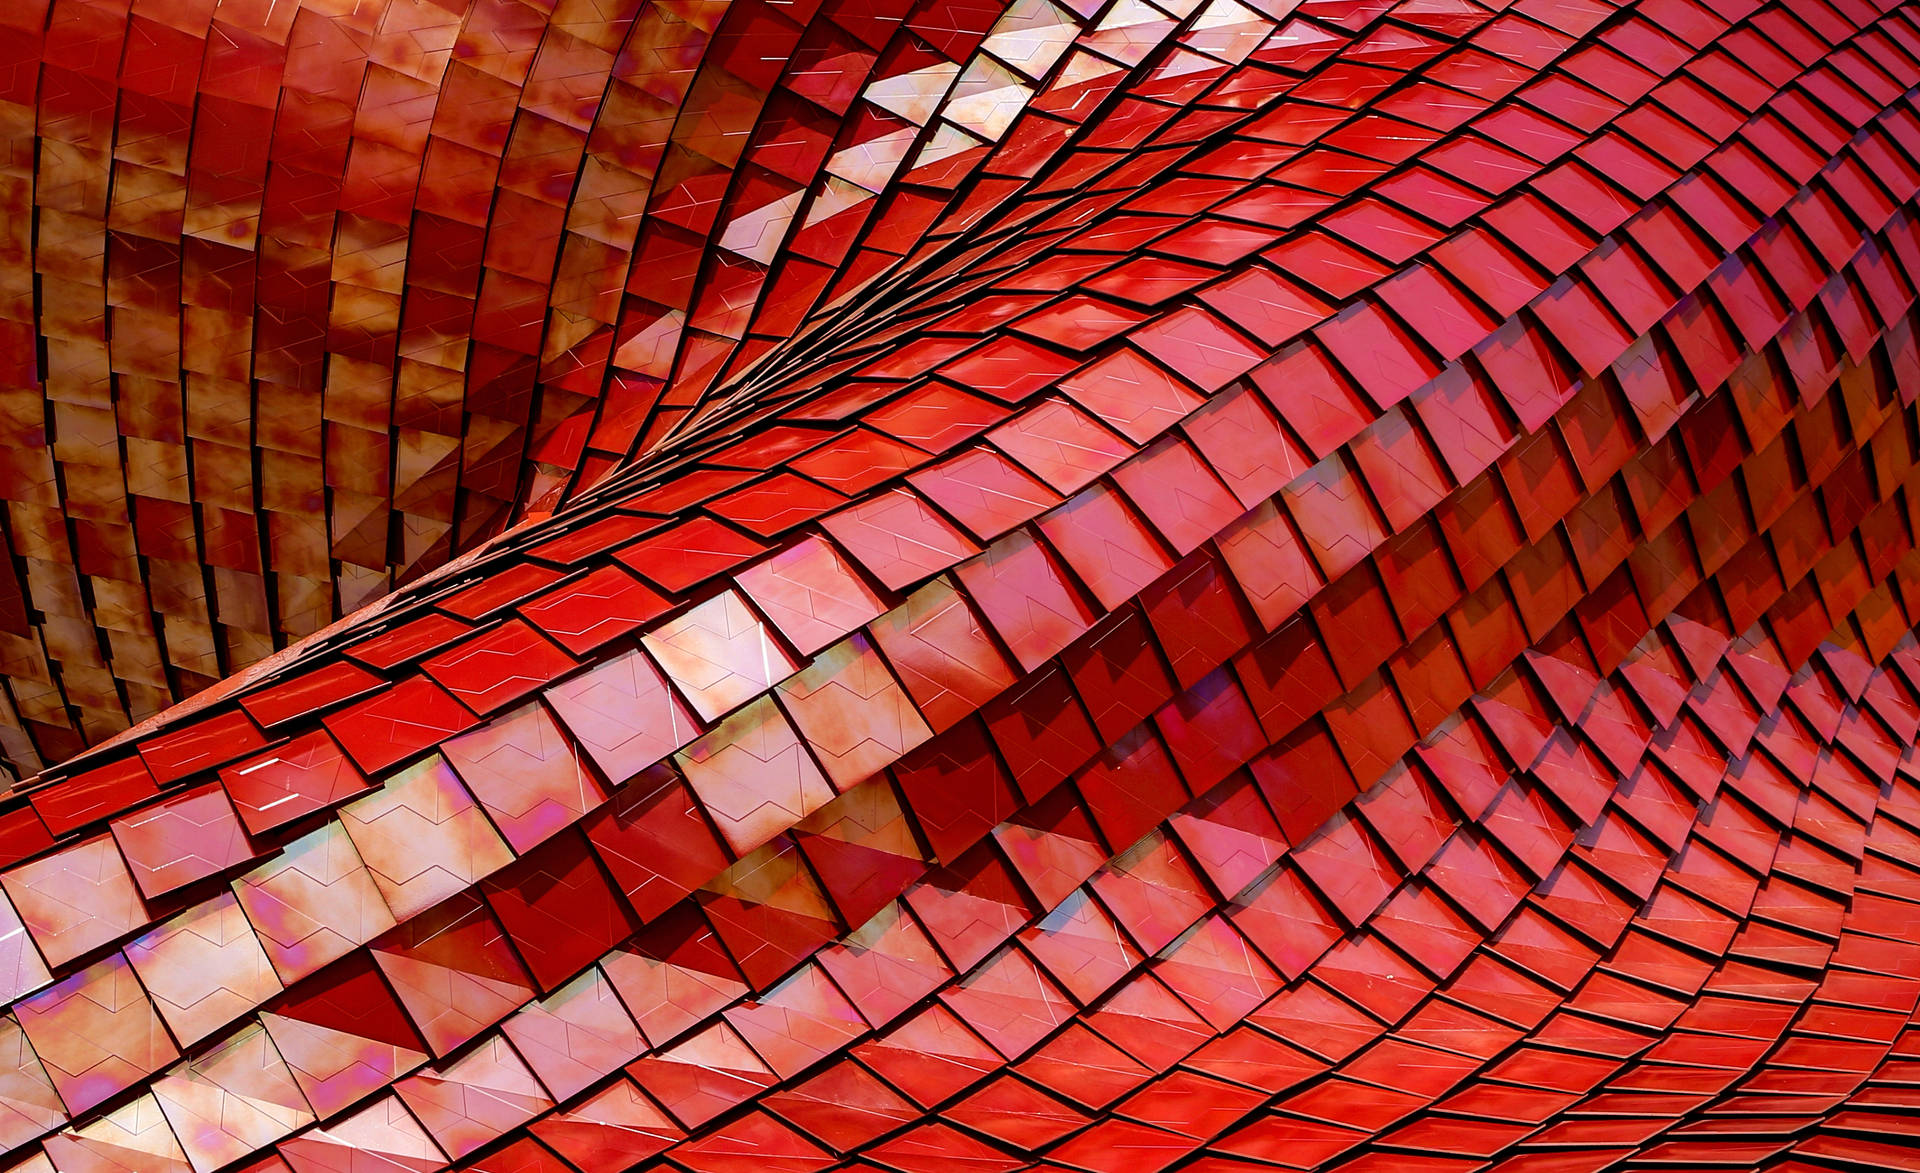 "A vibrant perspective of shining red tiles." Wallpaper